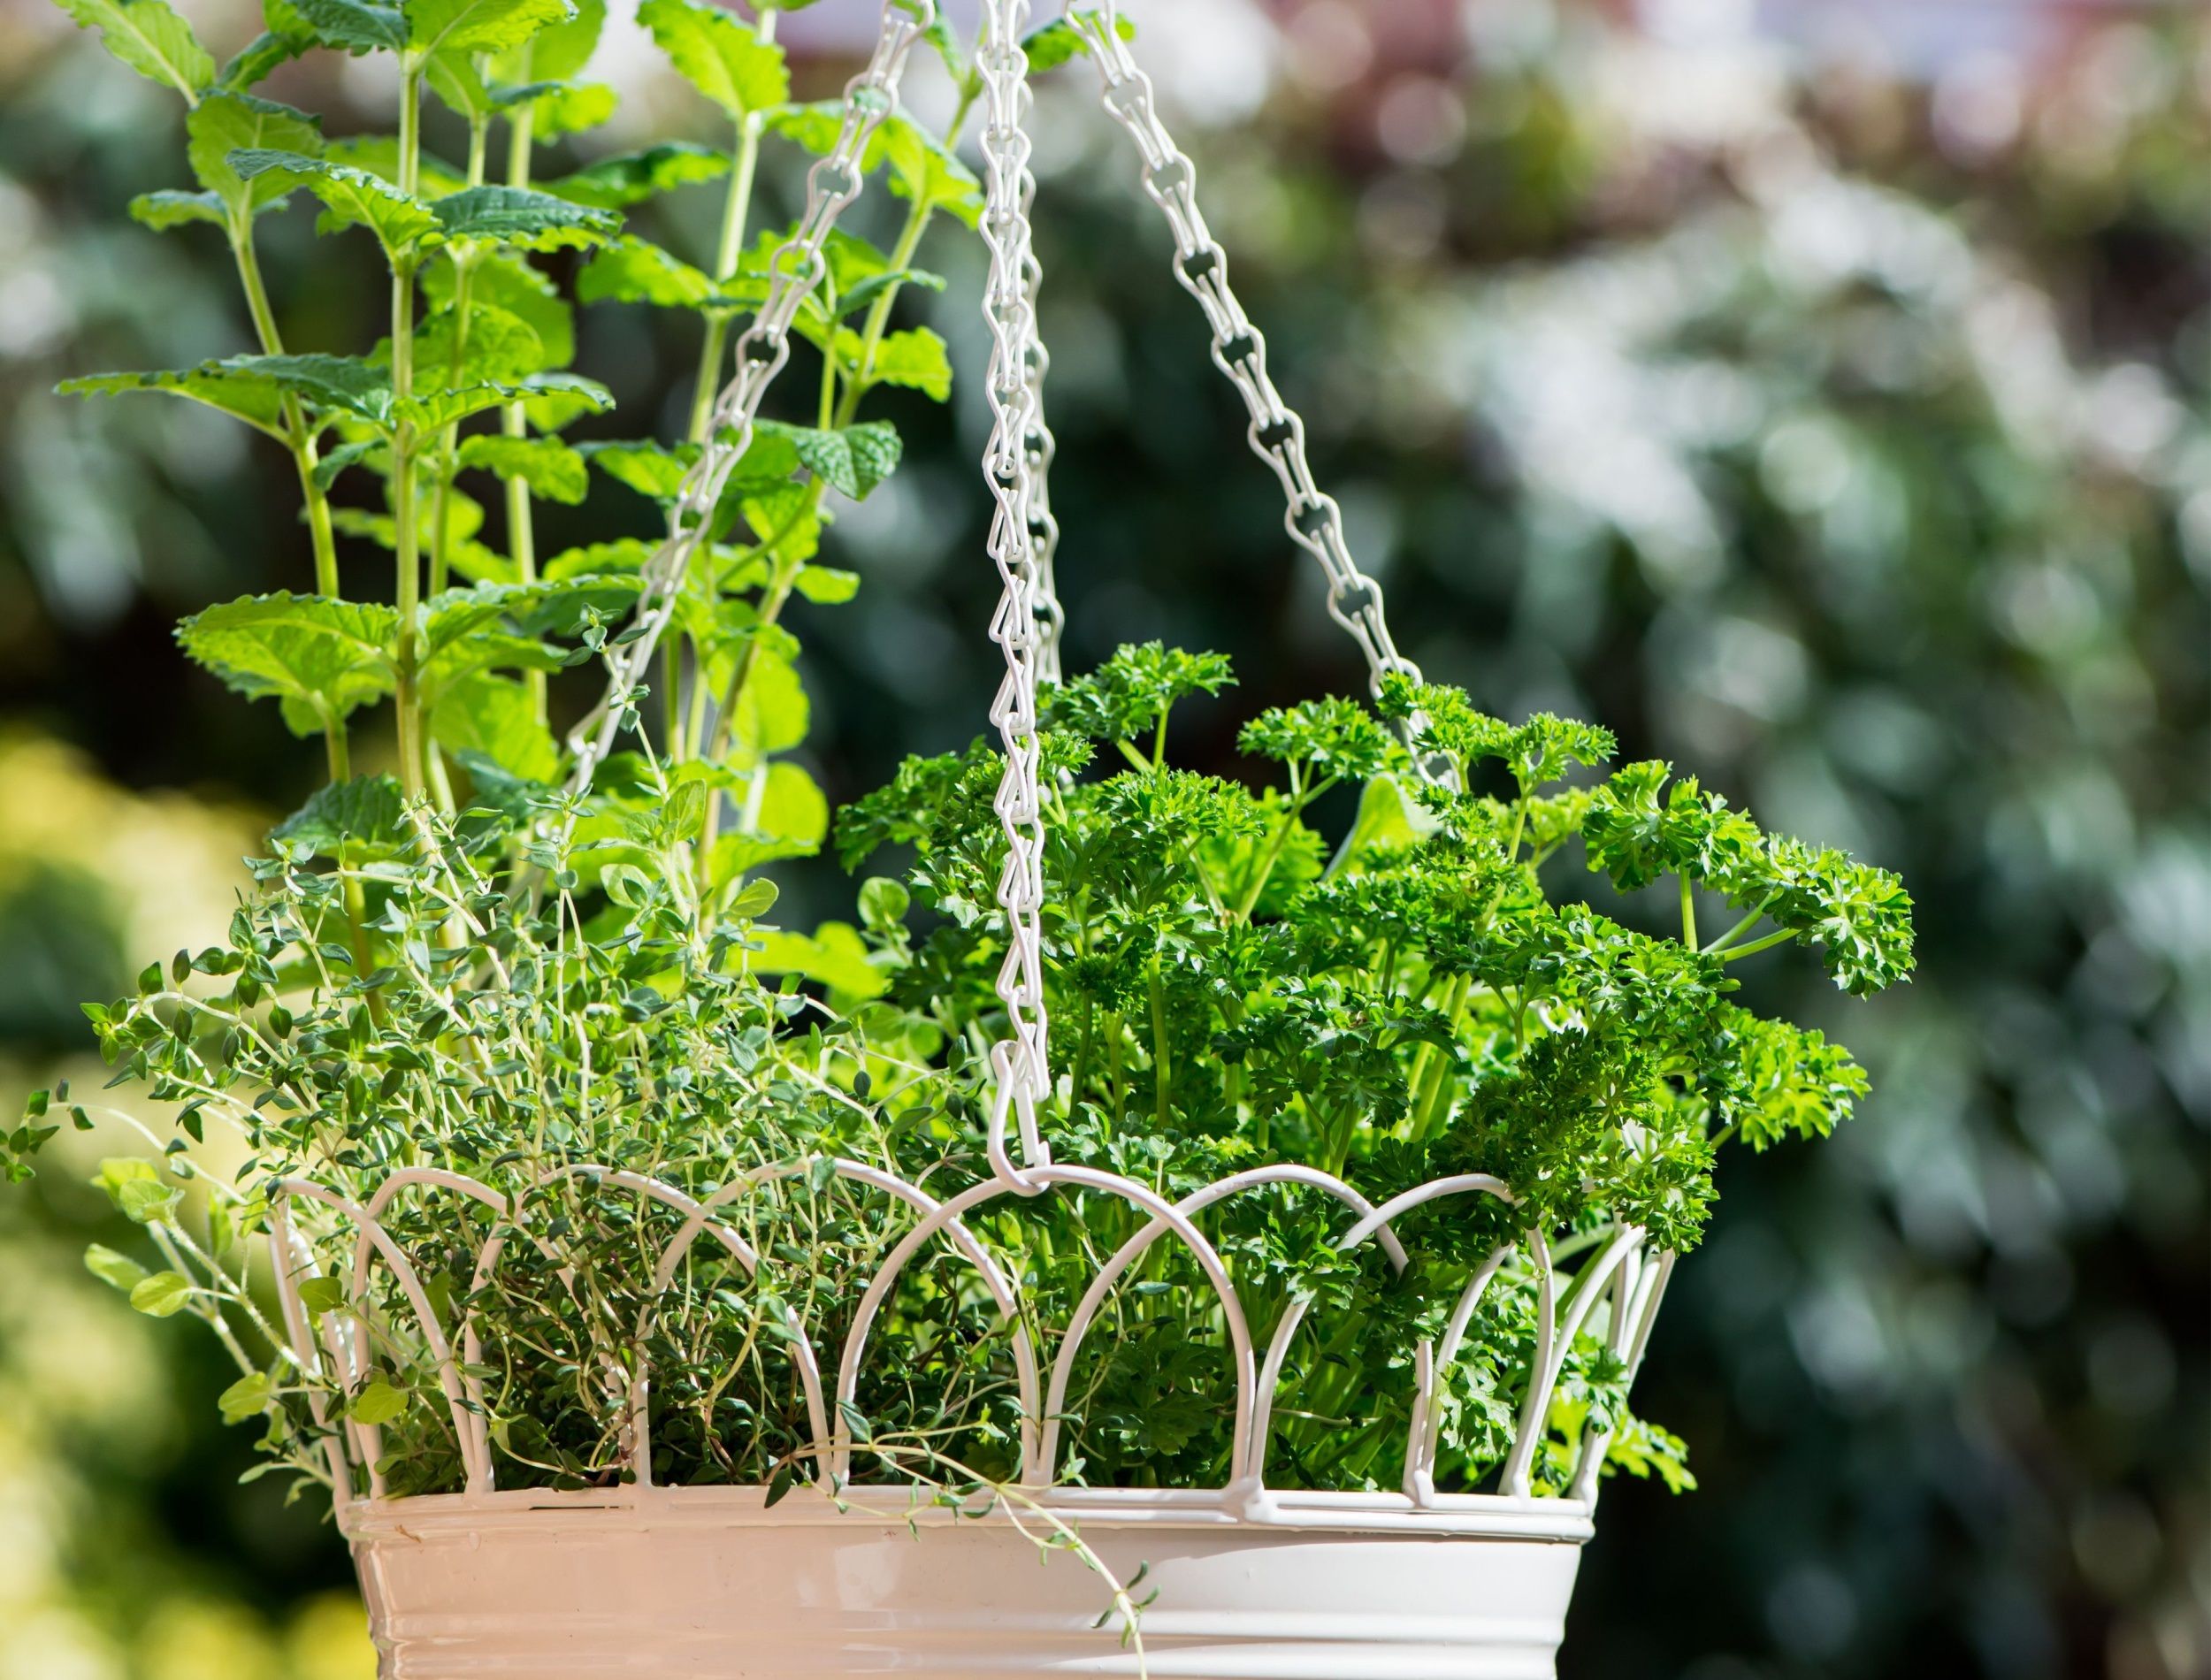 Fresh Herbs in Hanging Outdoor Basket. Contains the following Parsley, Marjoram, Sage, Thyme, and Mint